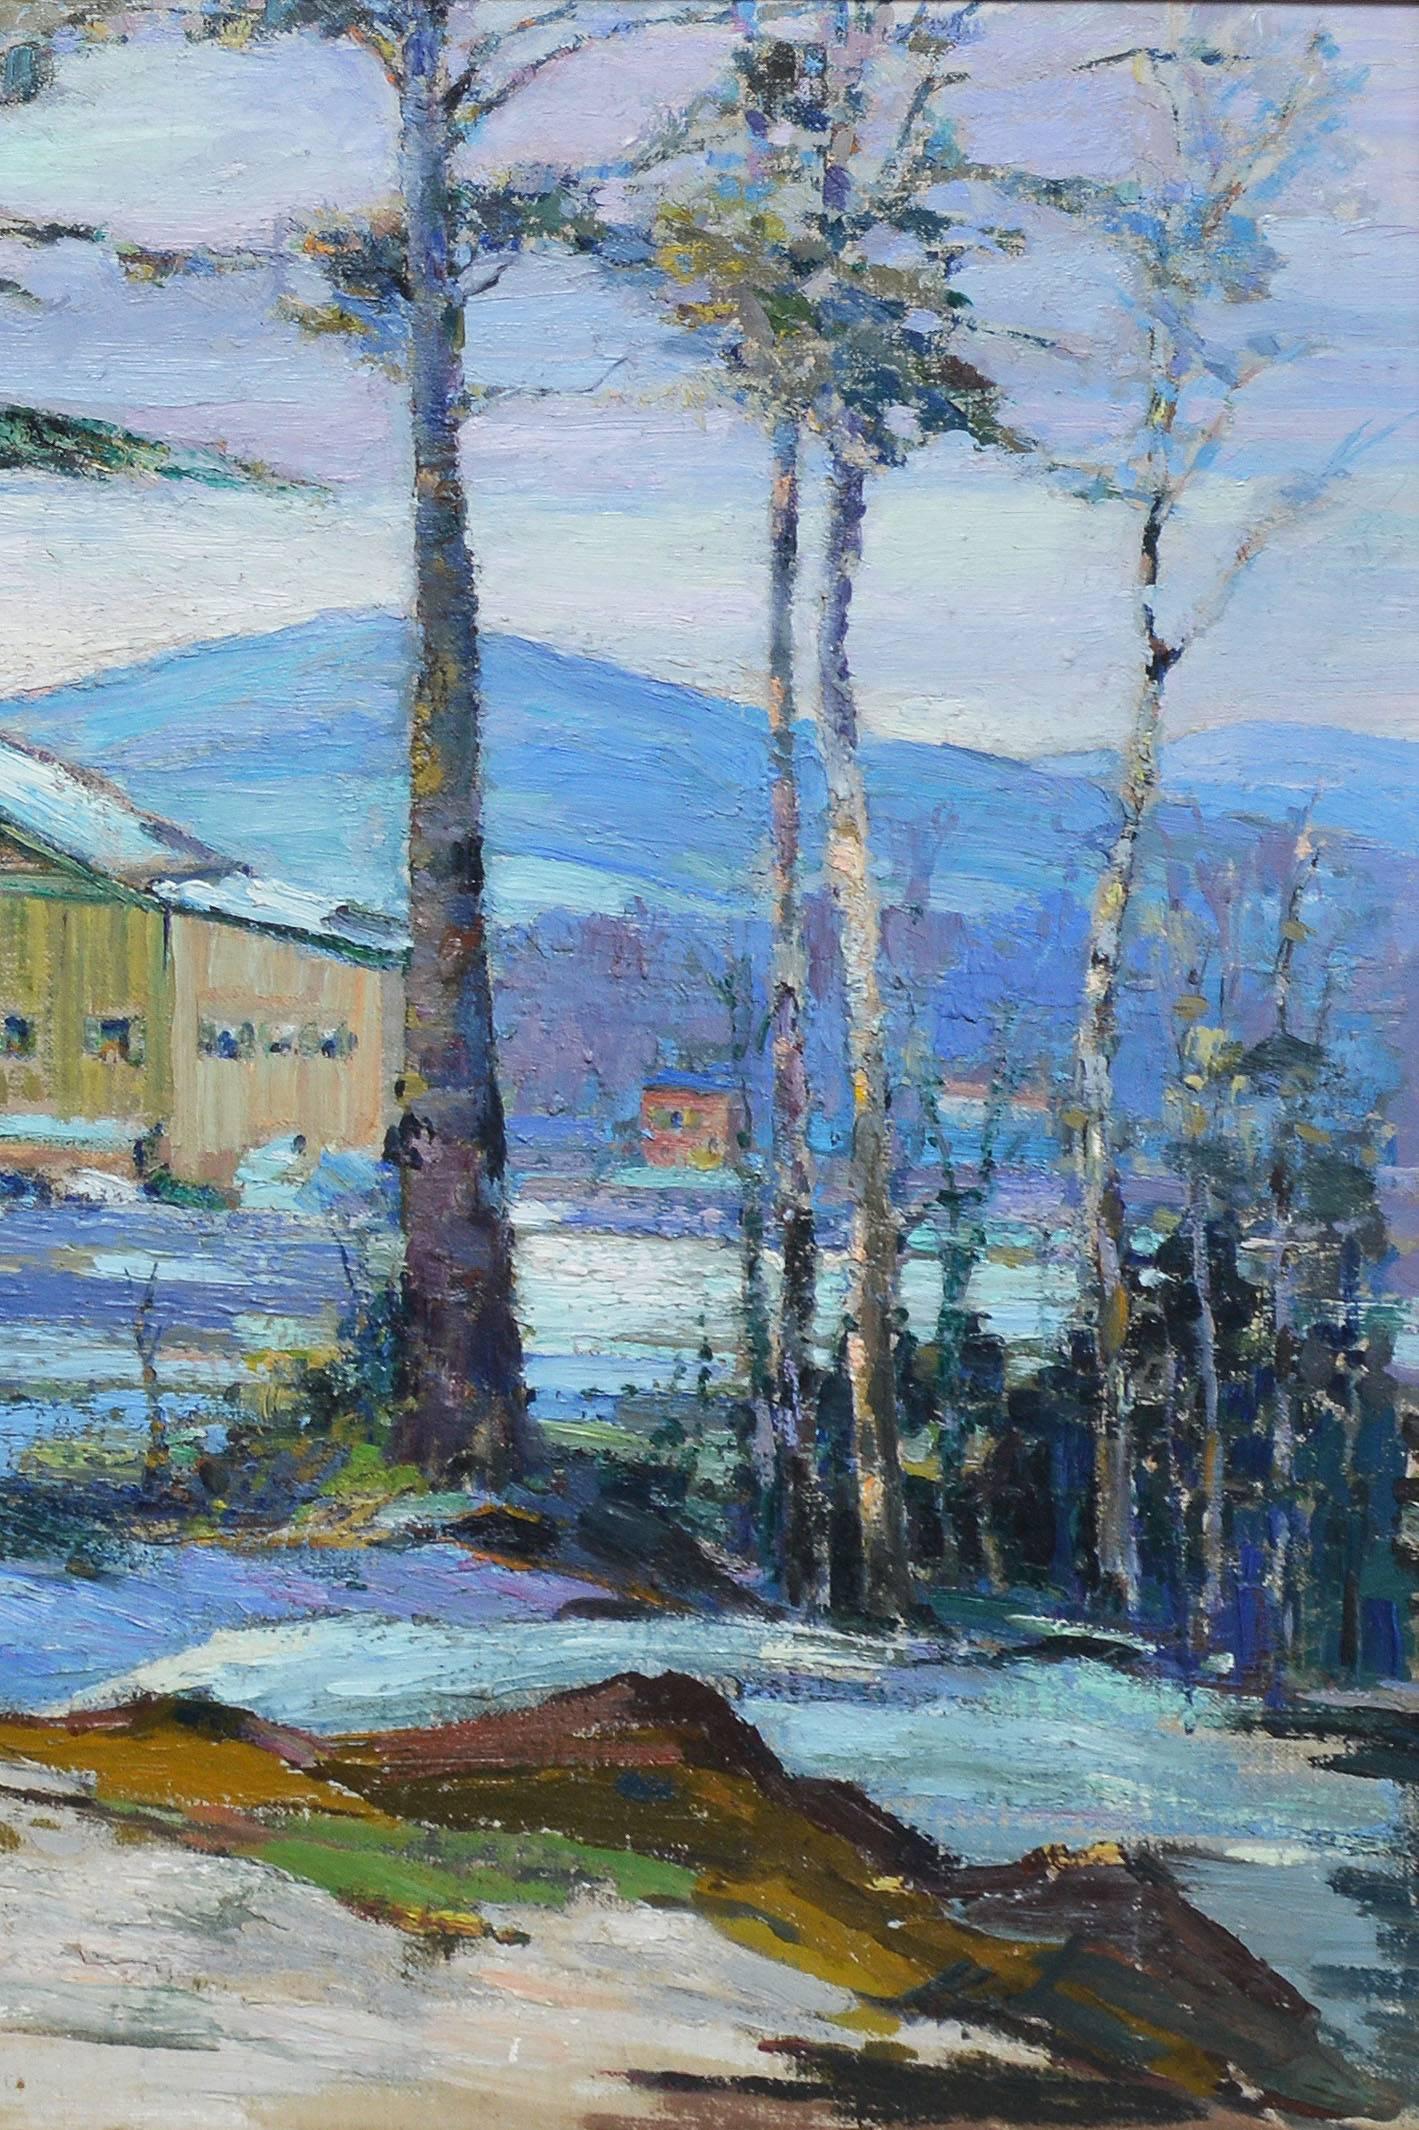 Impressionist winter landscape by Peter Bela Mayer (1887-1993).  Oil on board, circa 1920.  Signed lower left, "Peter Bela Mayer".  Displayed in a gold impressionist frame.  Image size, 24"L x 20"H, overall, 33"L x 29"H.